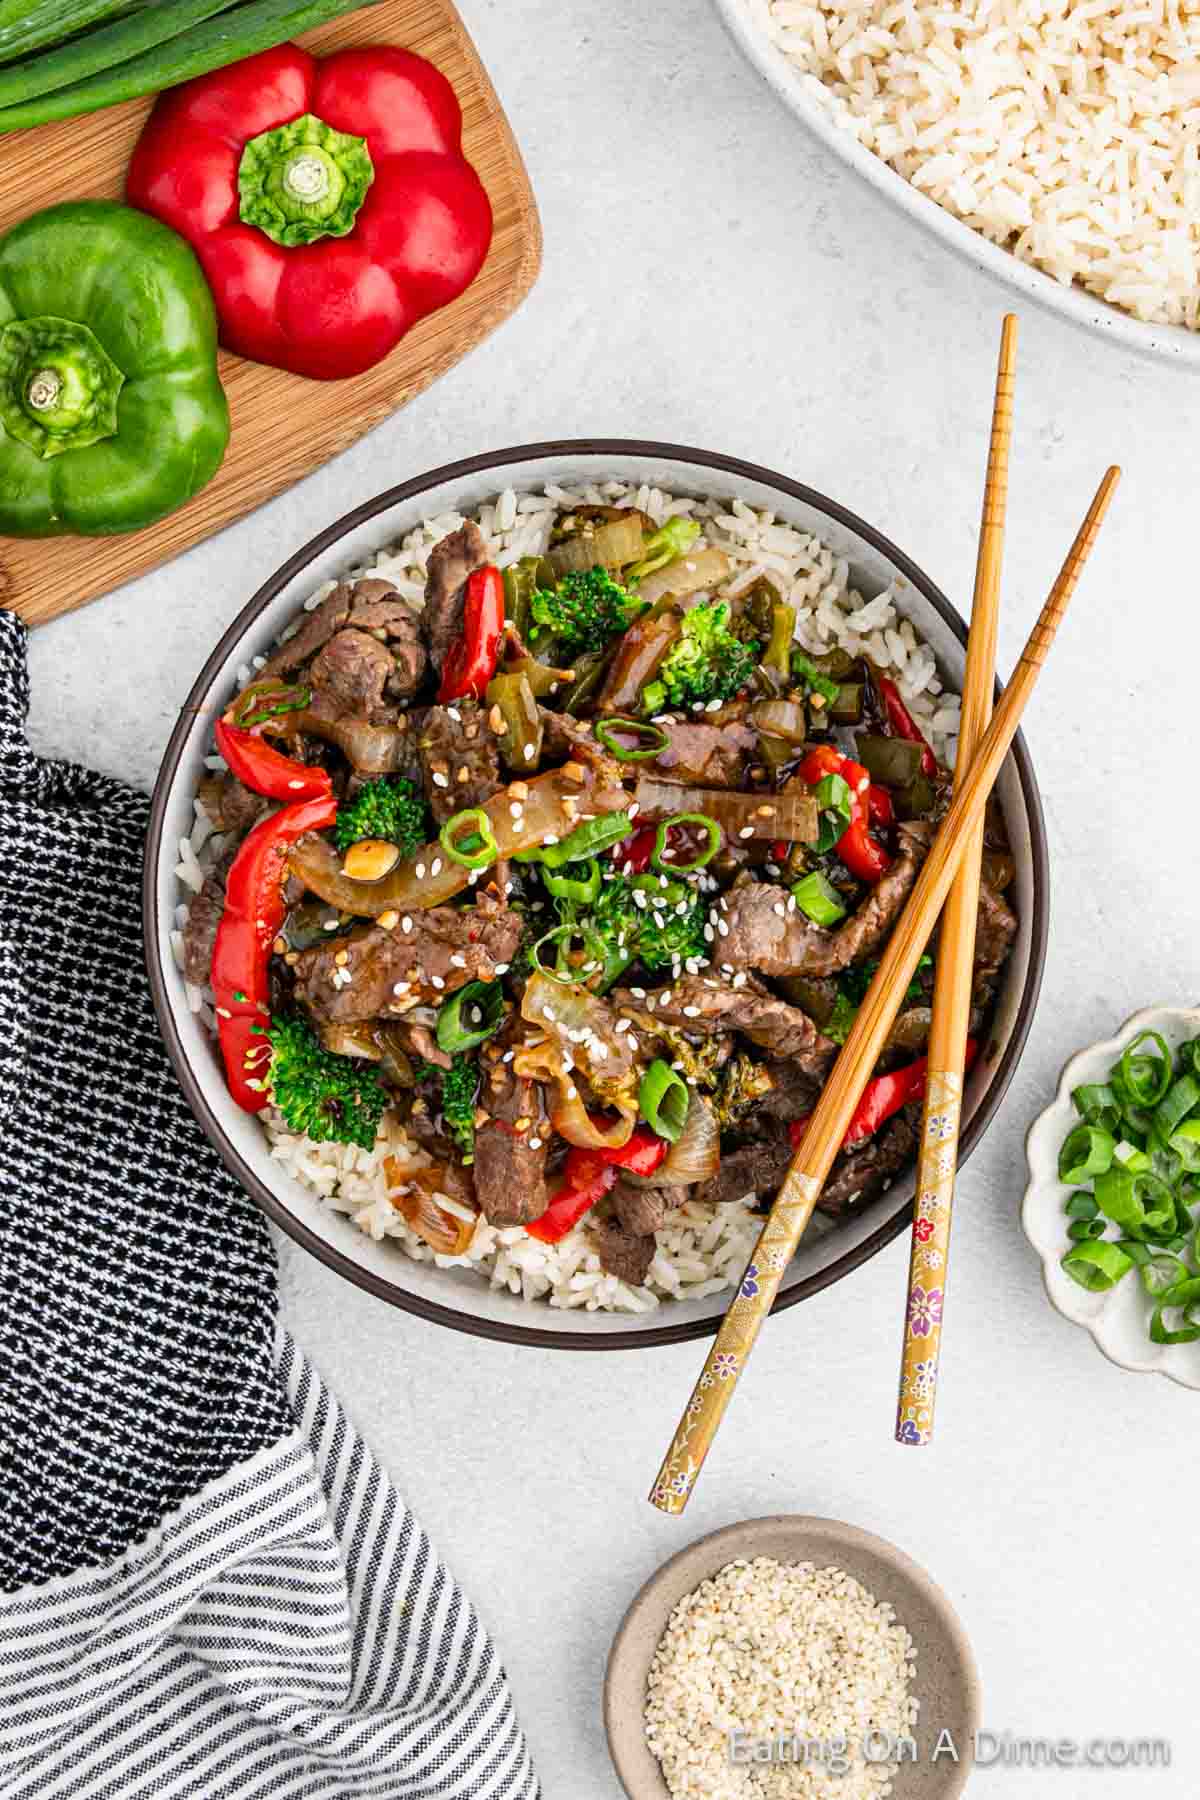 Bowl of beef stir fryer over rice with chop sticks